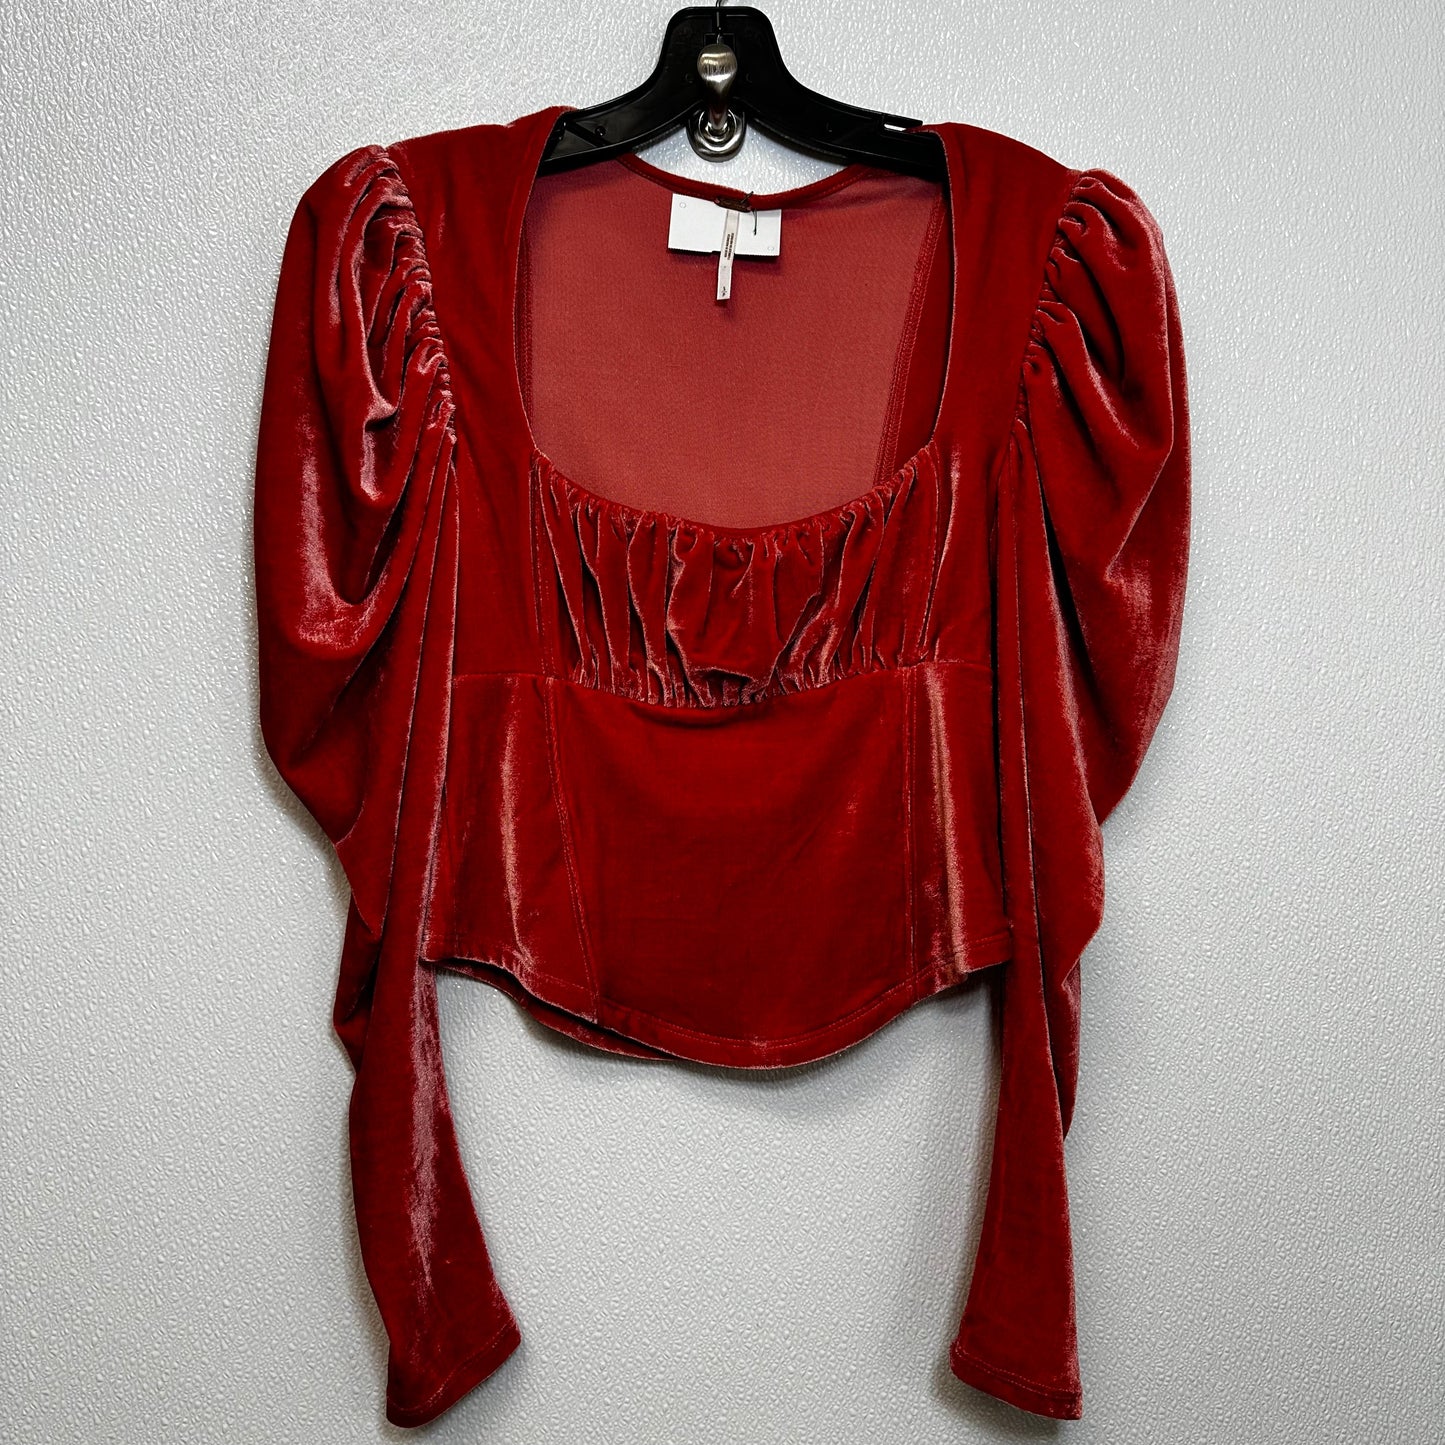 Terracotta Top Long Sleeve Free People, Size S